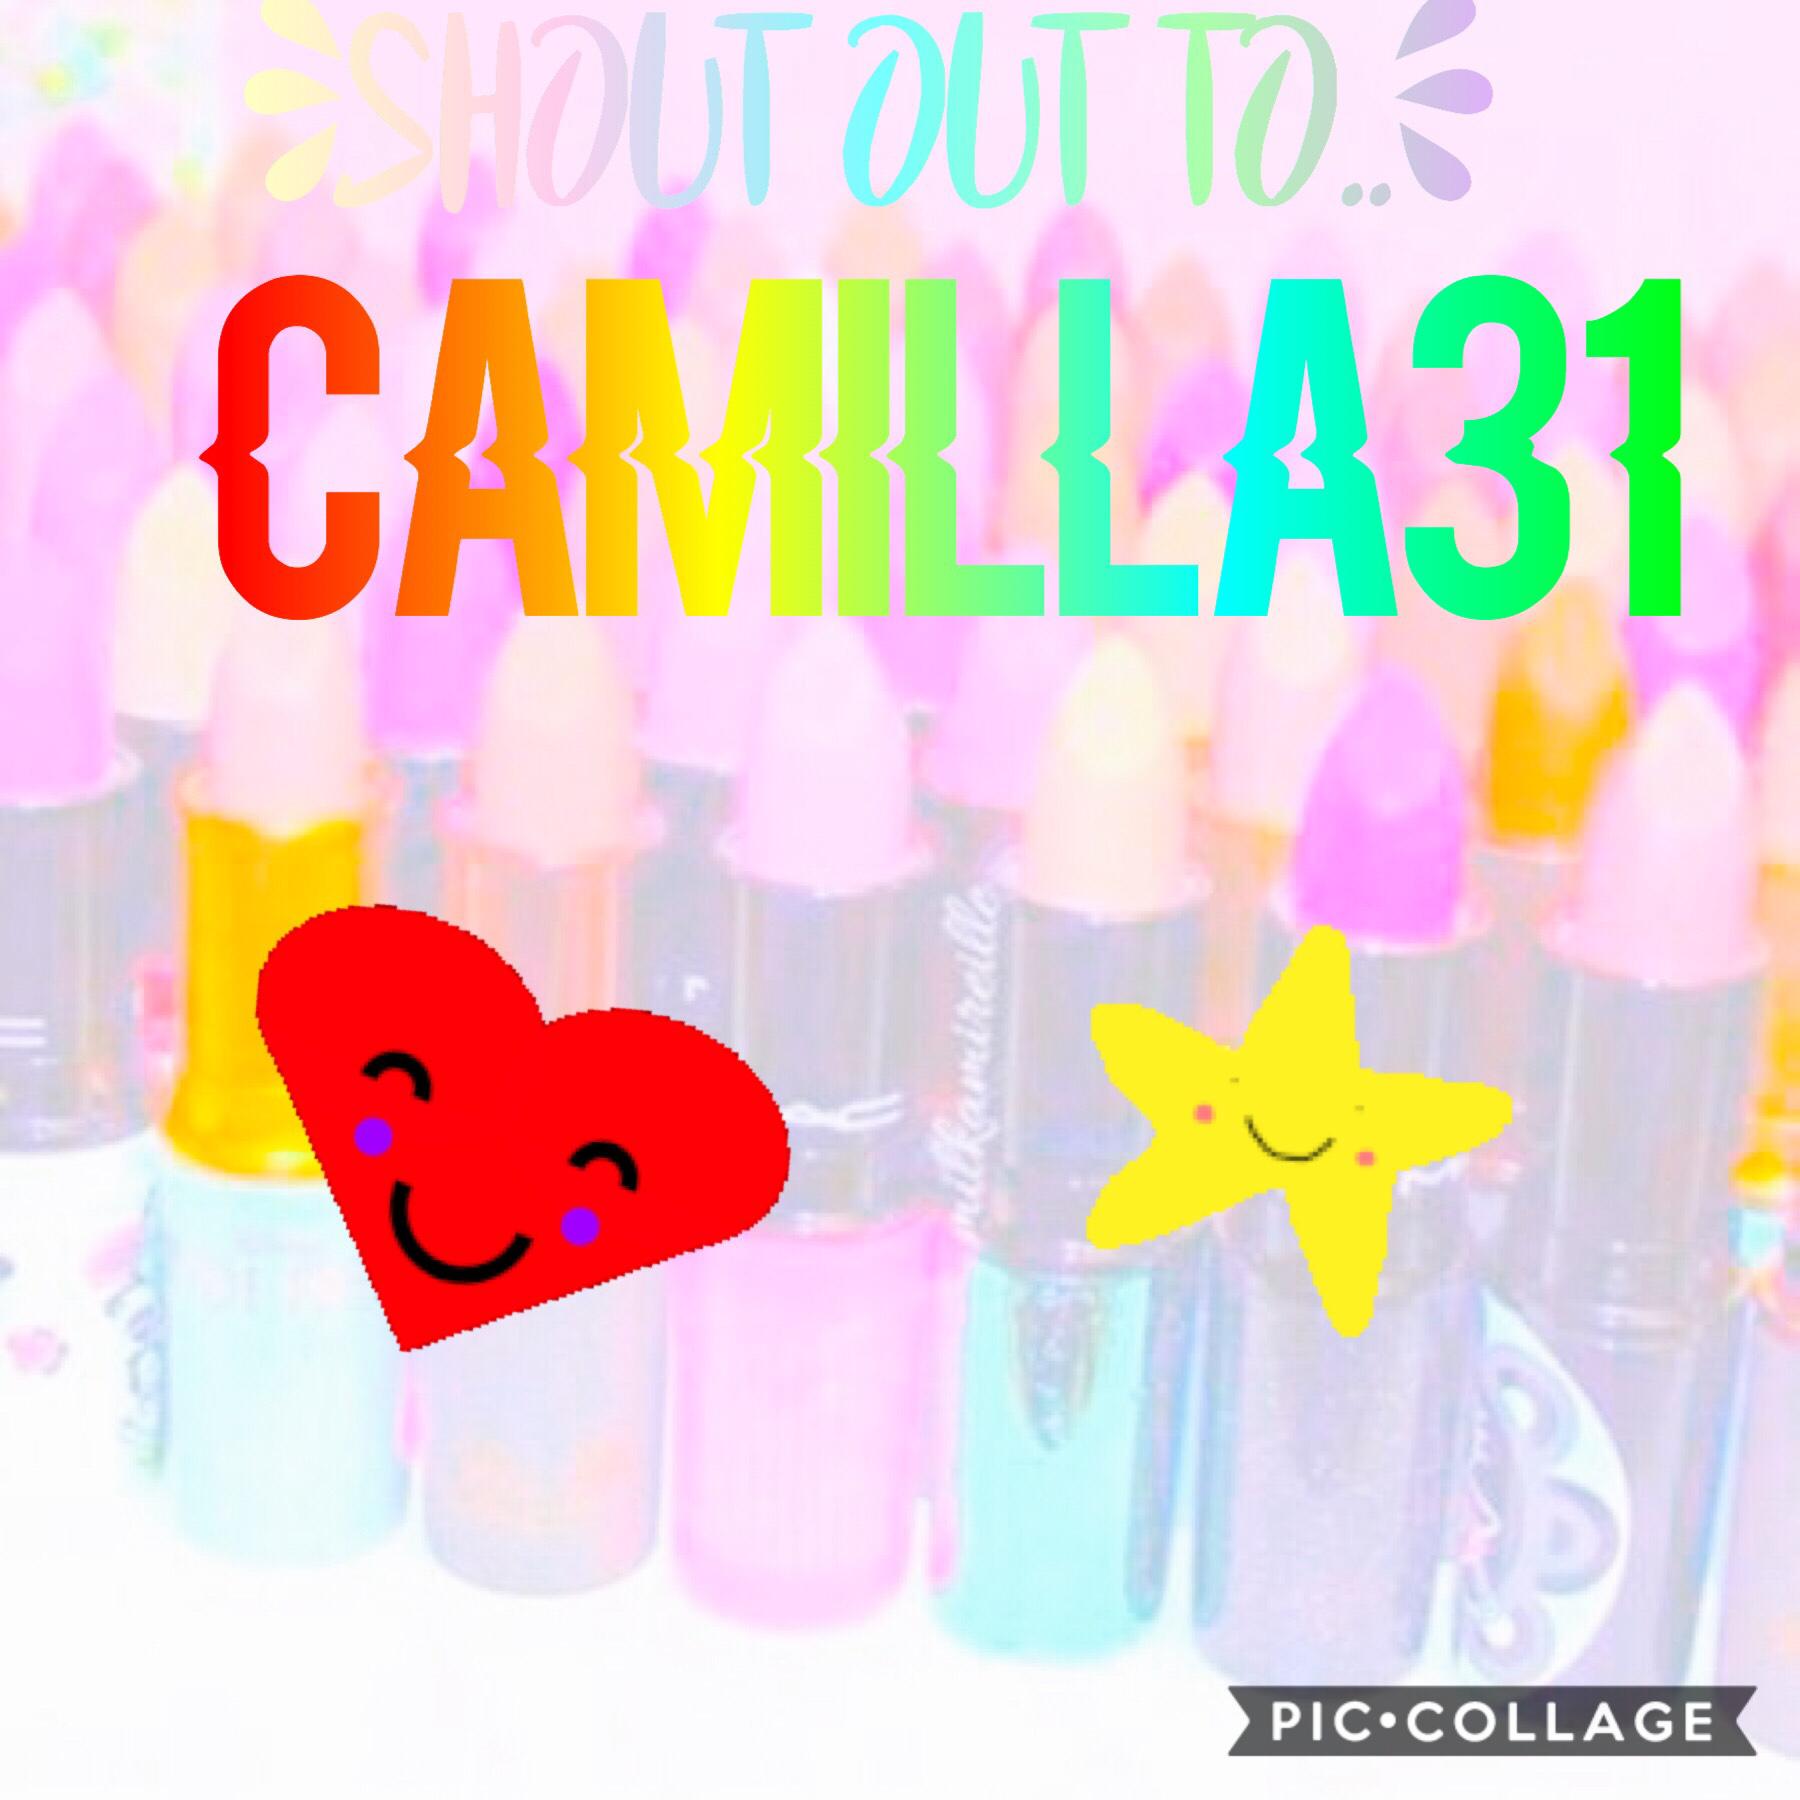 Shout out to... Camilla31!!!💖💖